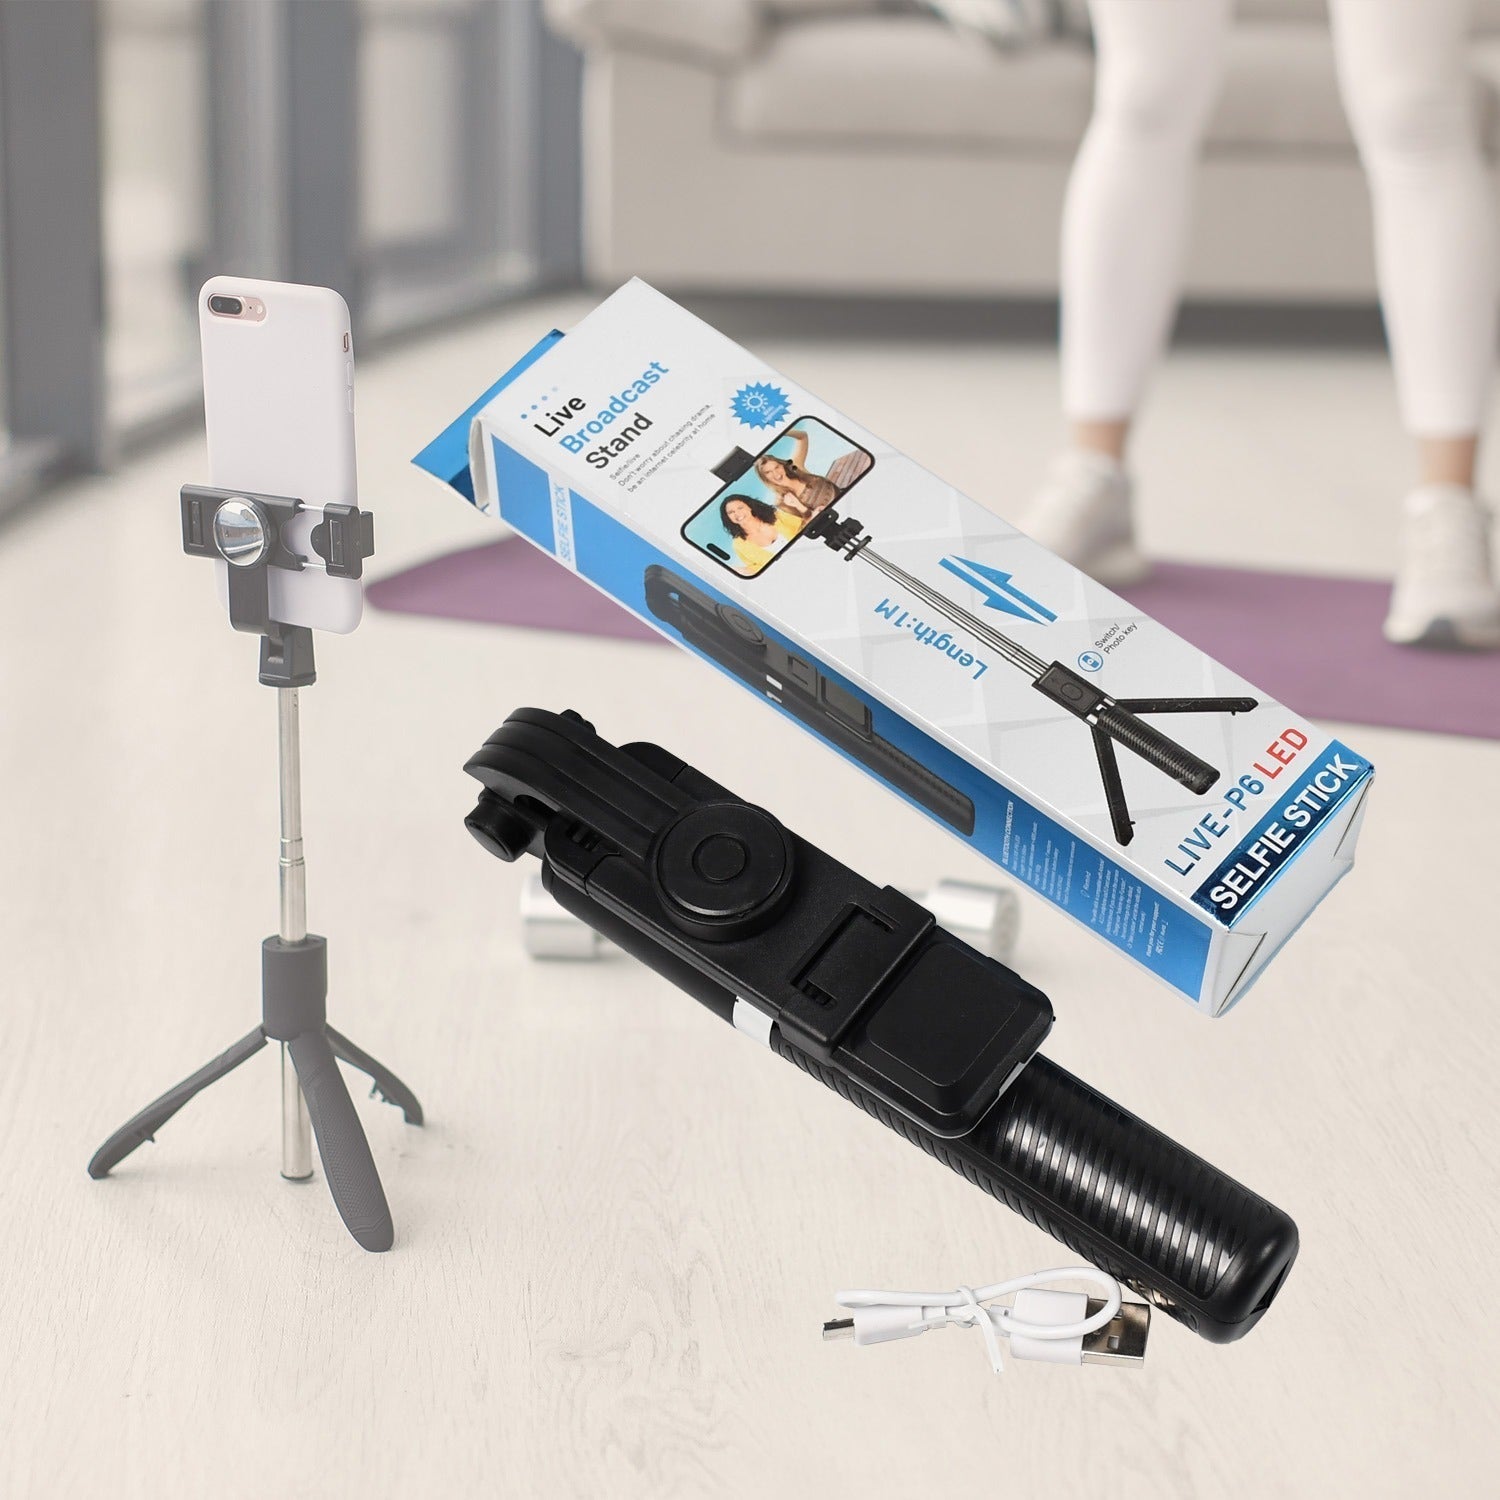 6400 Bluetooth Selfie Stick, Portable Phone Tripod Stand for Mobile. JK Trends